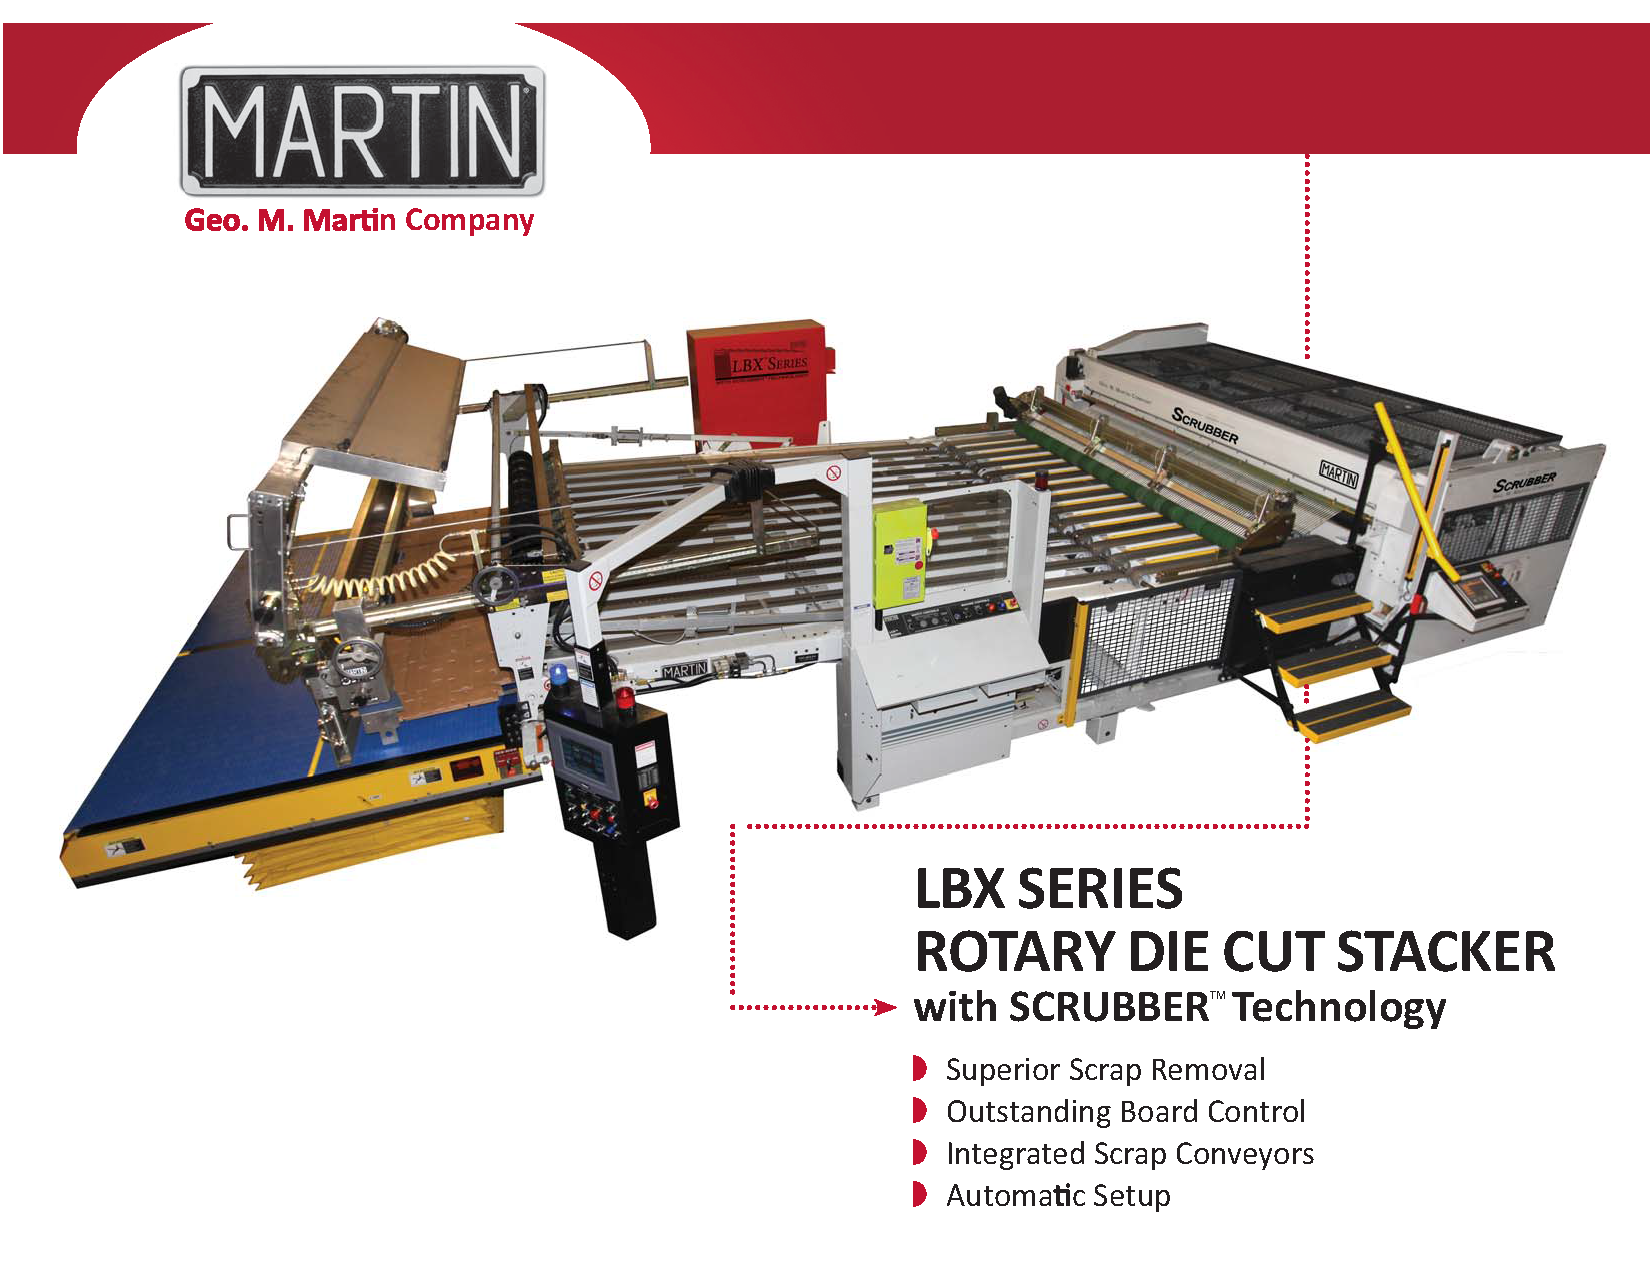 Learn more about the LBX RDC Scrubber Stacker in the Geo. M. Martin brochure!